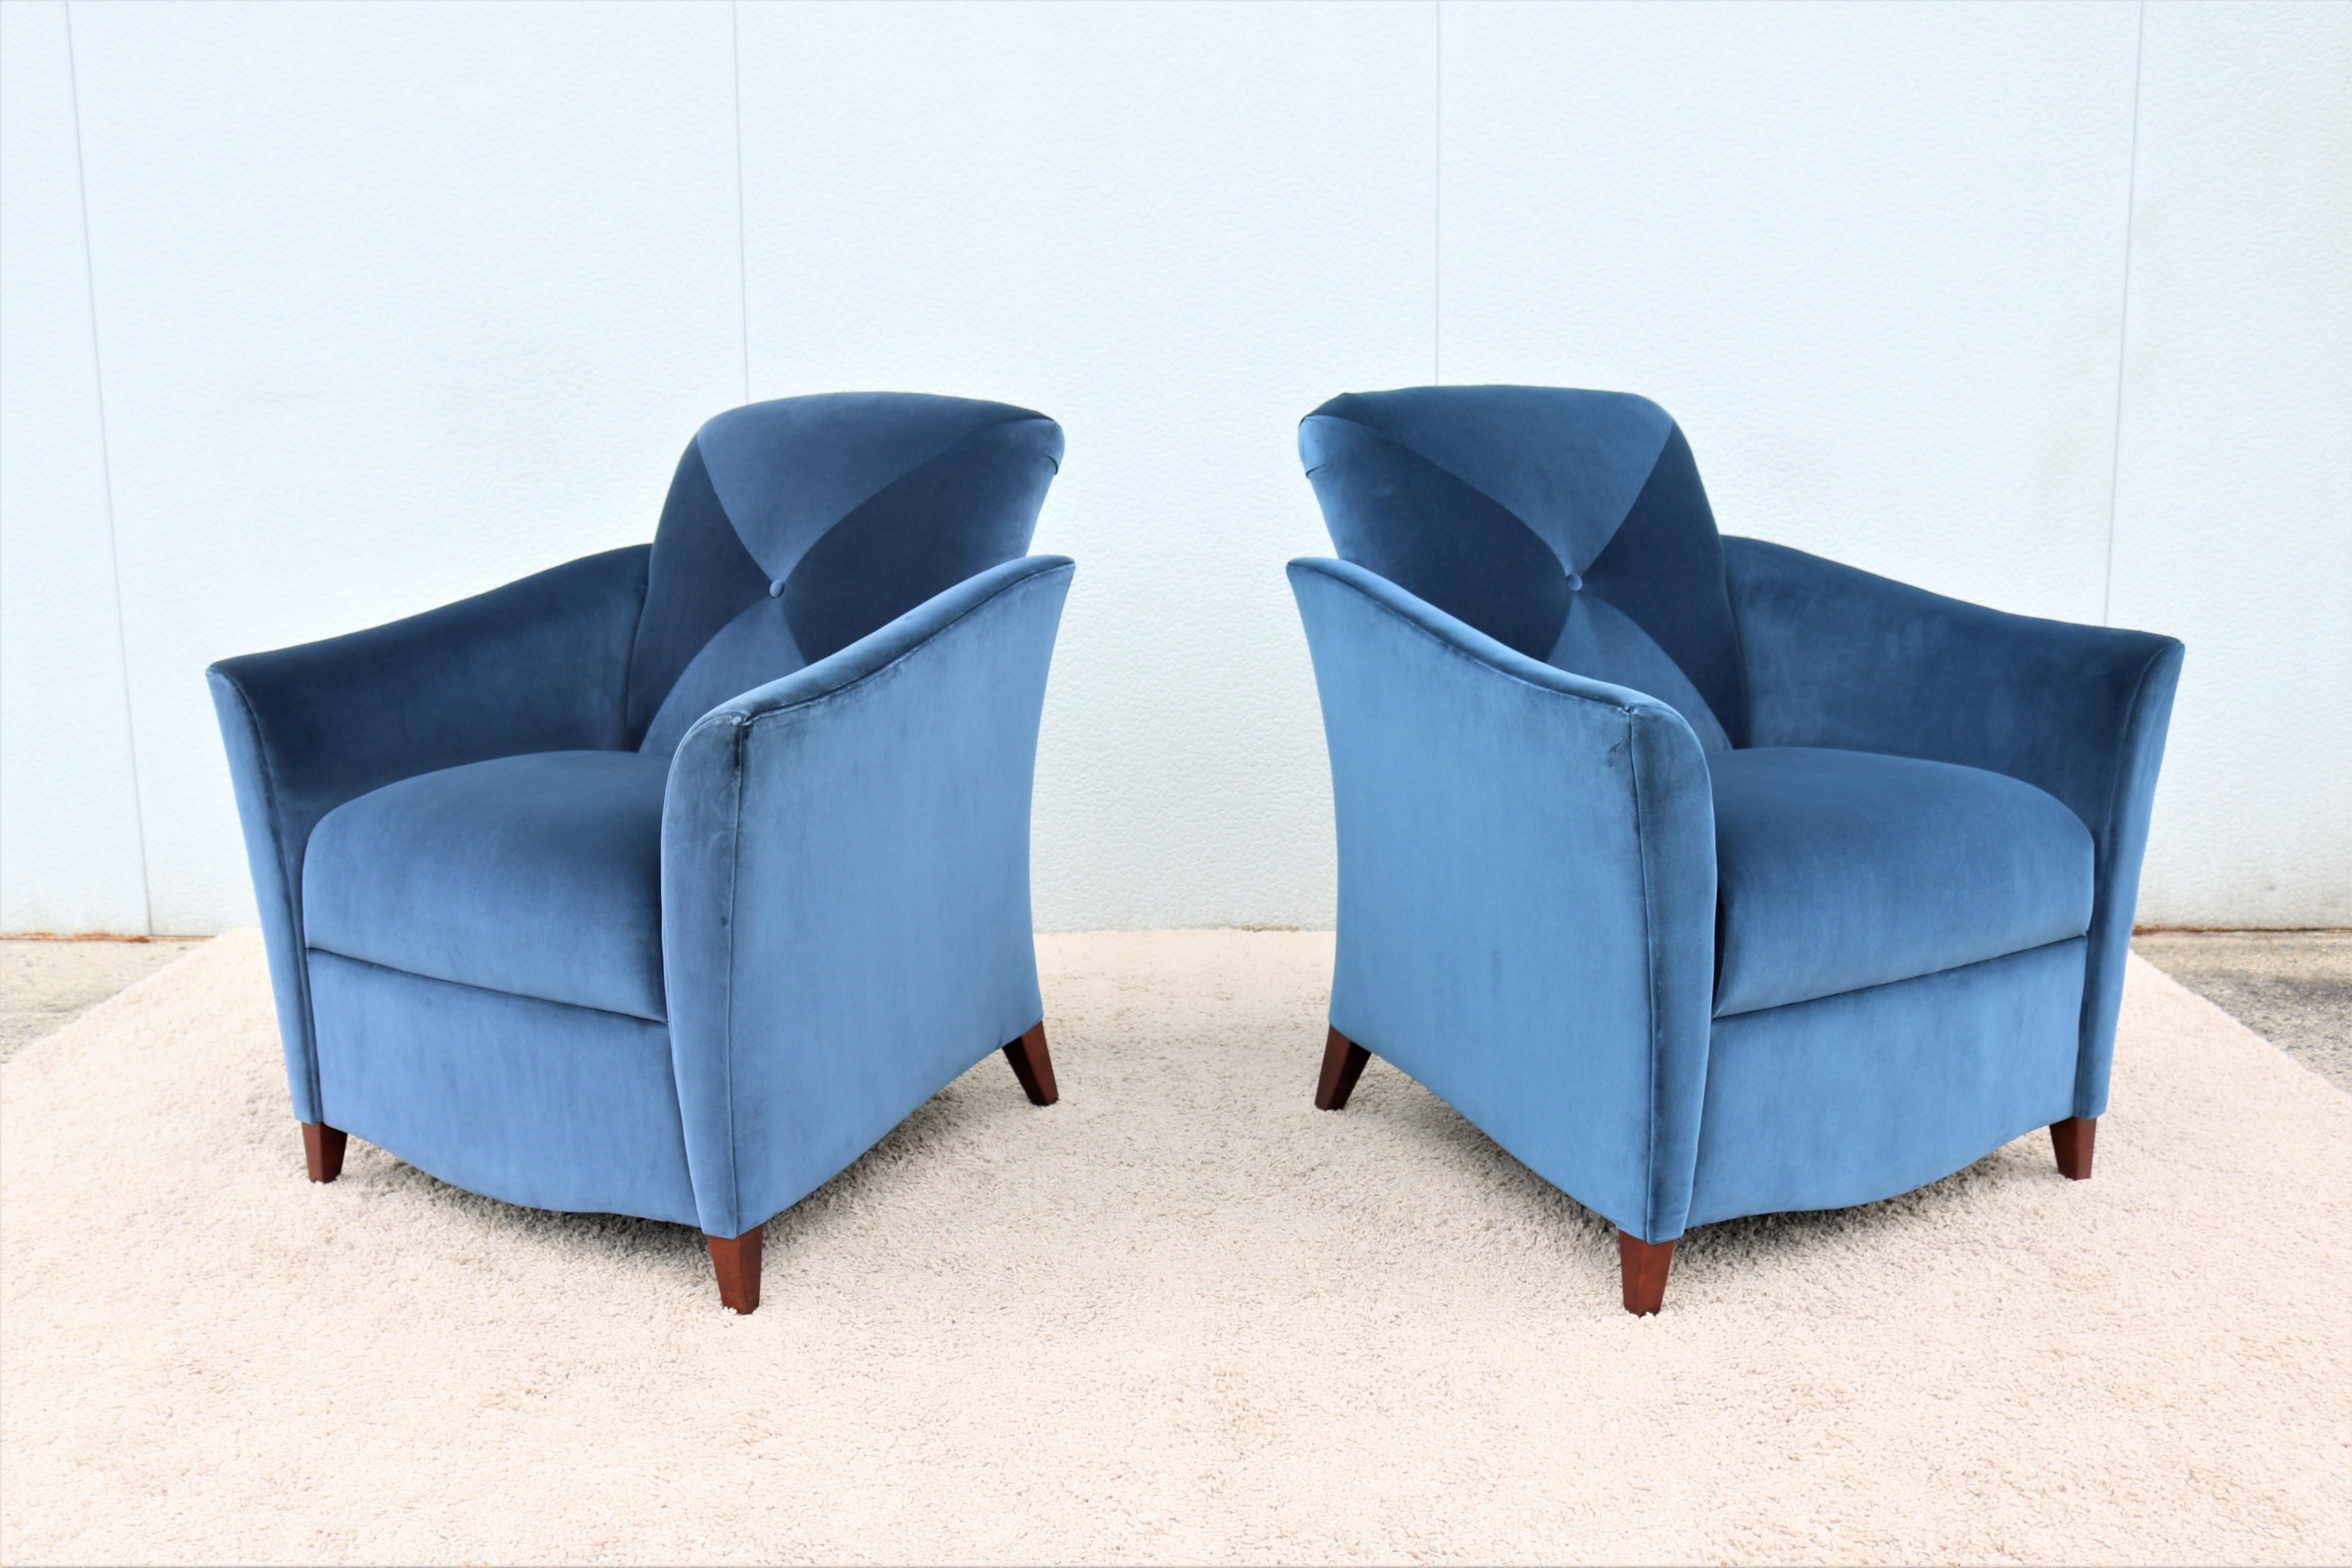 American Art Deco Style Royal Blue Velvet Portrait Lounge Chairs by Jofco, a Pair For Sale